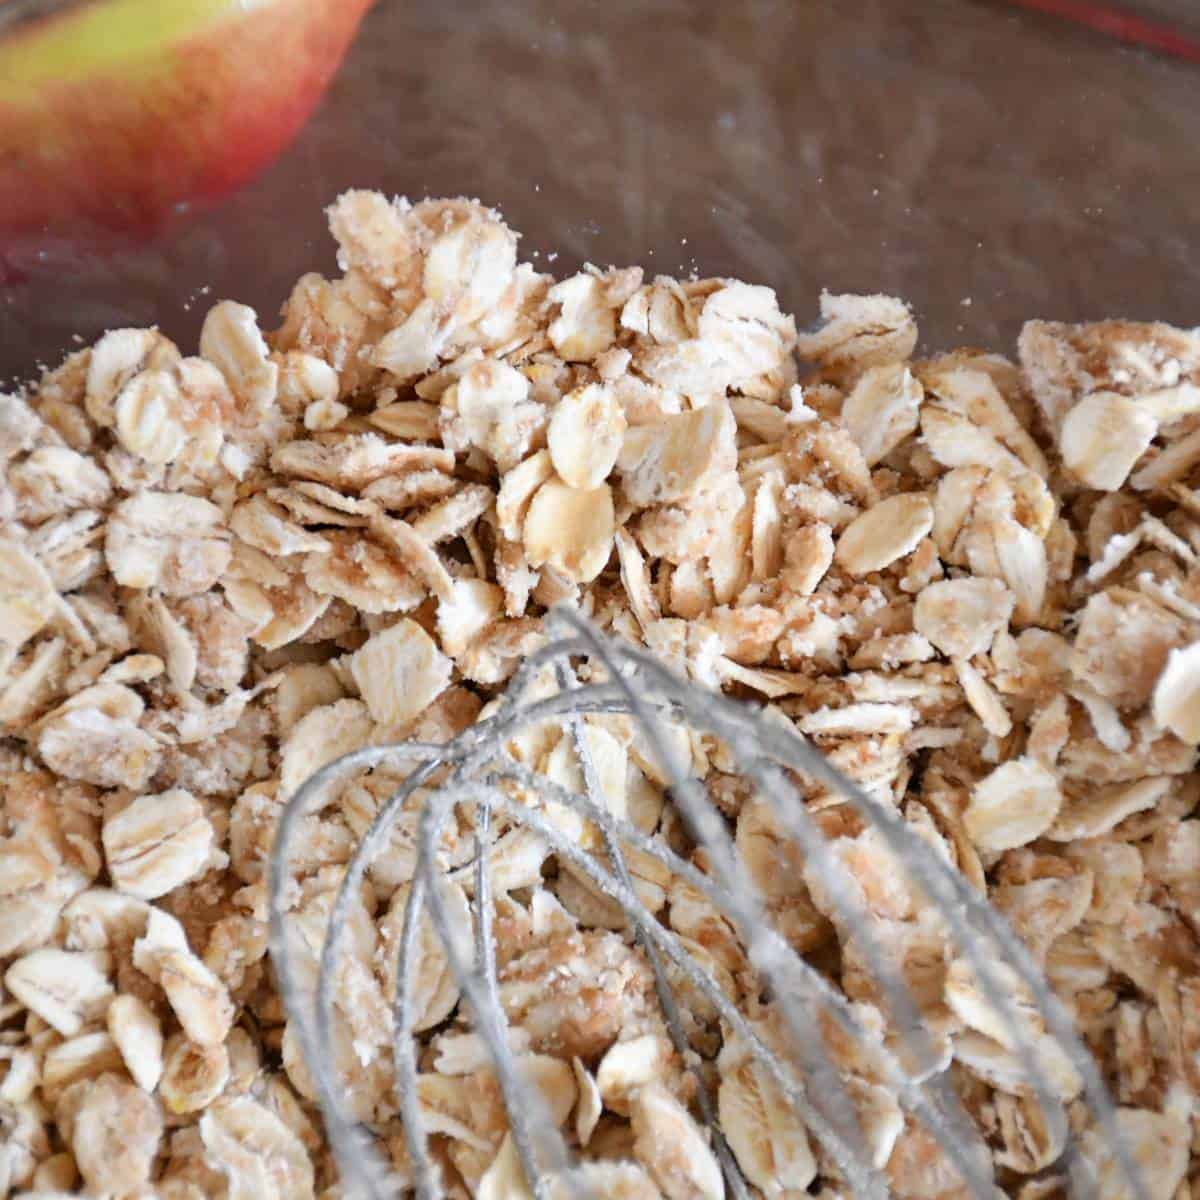 Rolled oats topping for the apple and cranberry crumble.